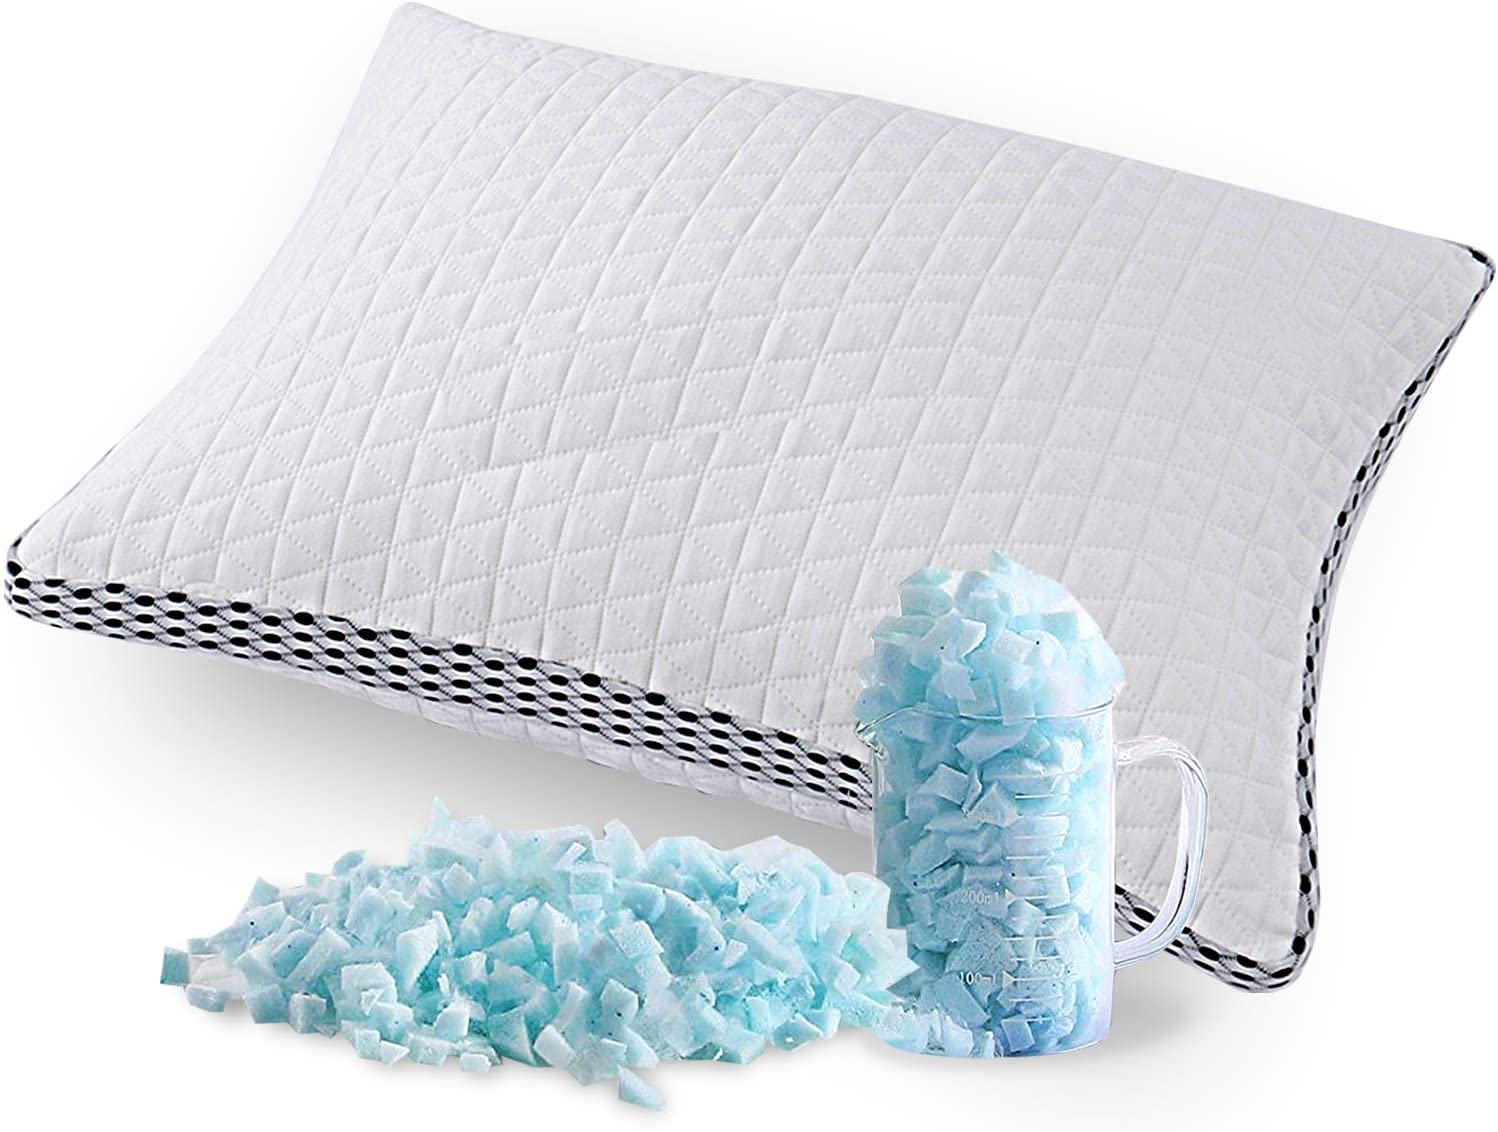 The Queen Size Bamboo Cooling Pillow provides excellent Neck and Shoulder Support